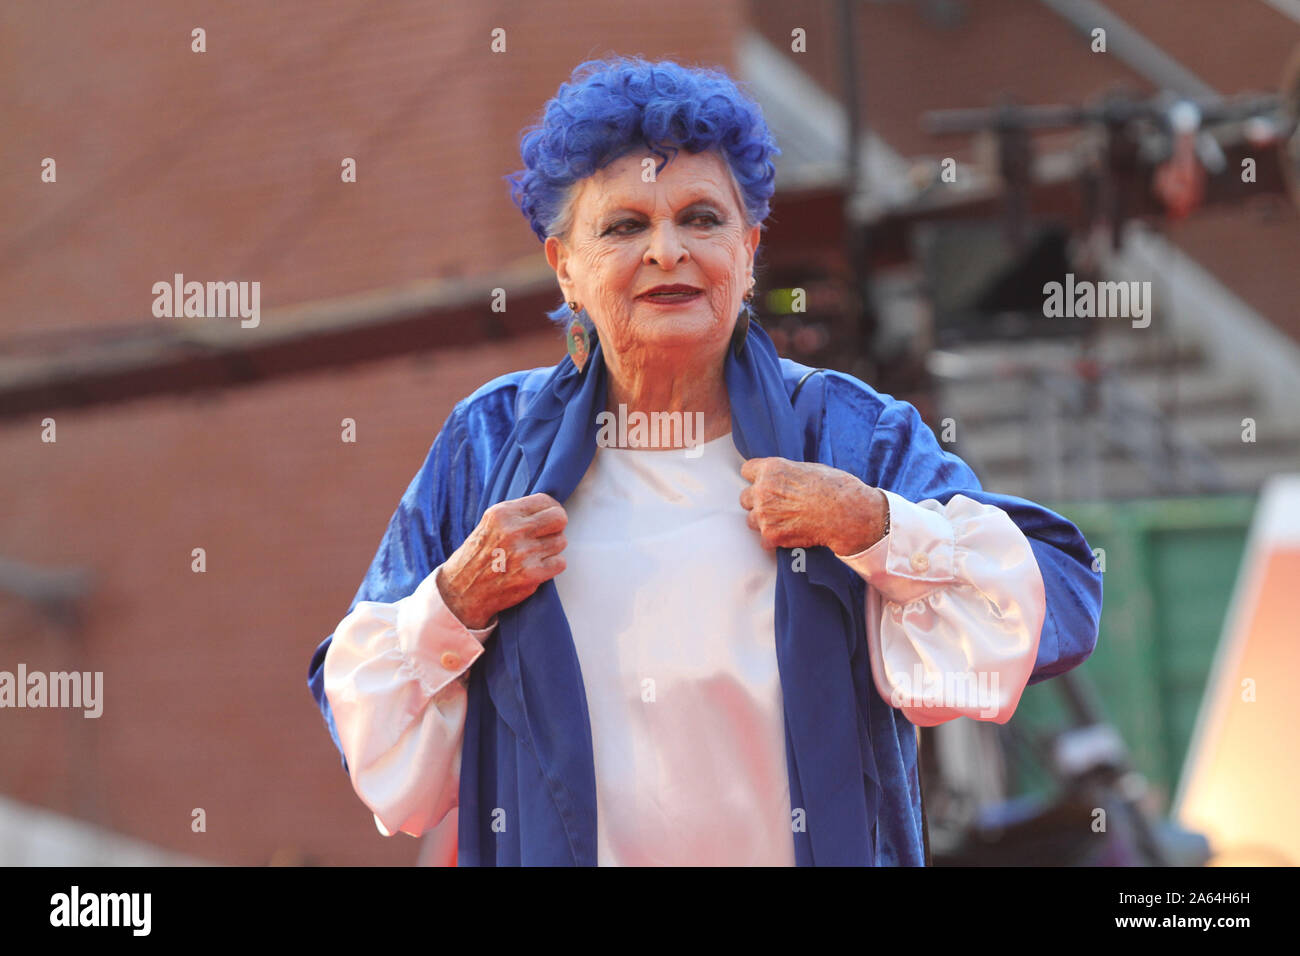 Lucia Bose High Resolution Stock Photography and Images - Alamy